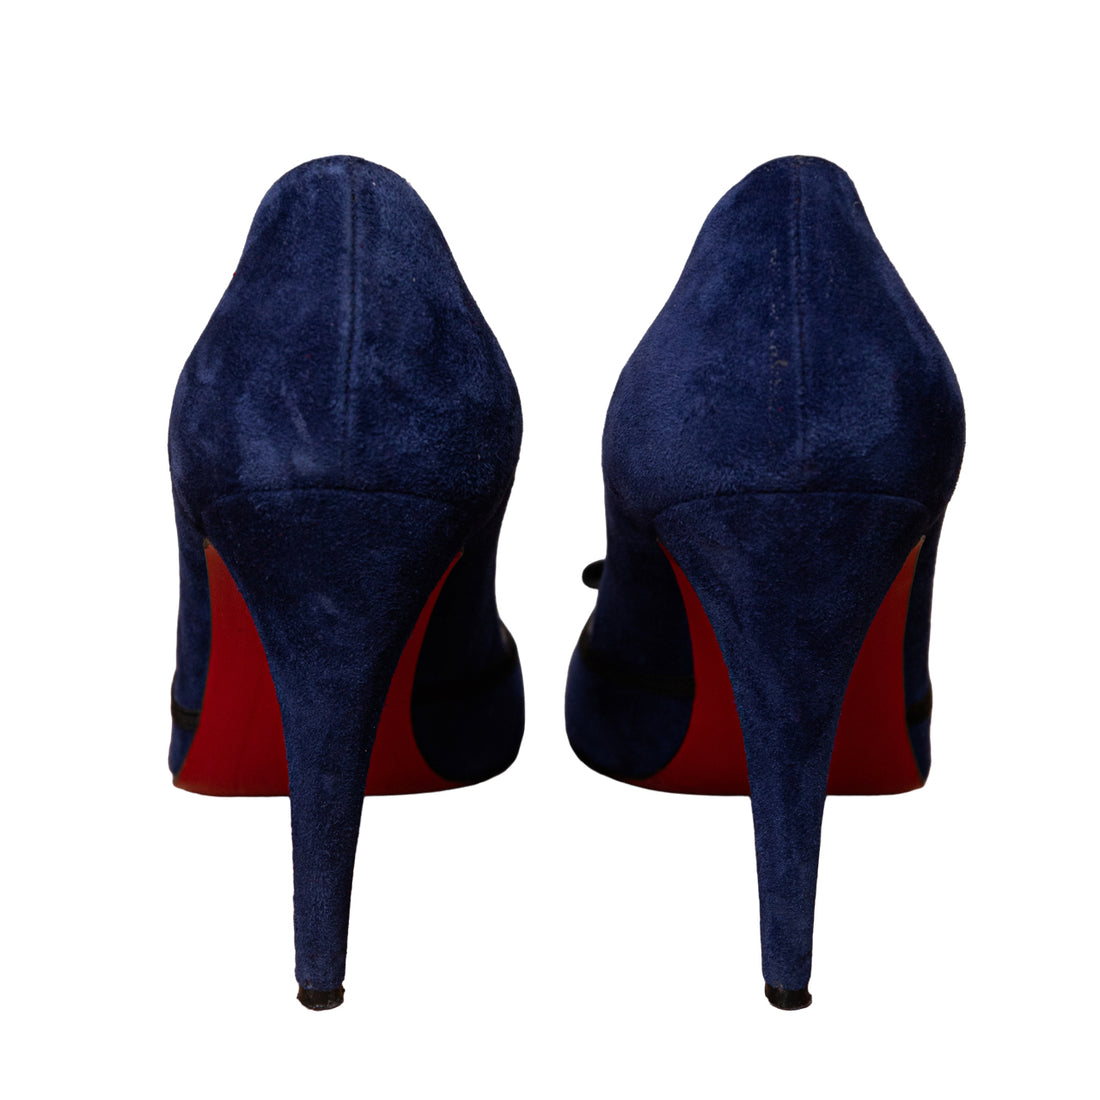 Christian Louboutin pumps in suede with bow details